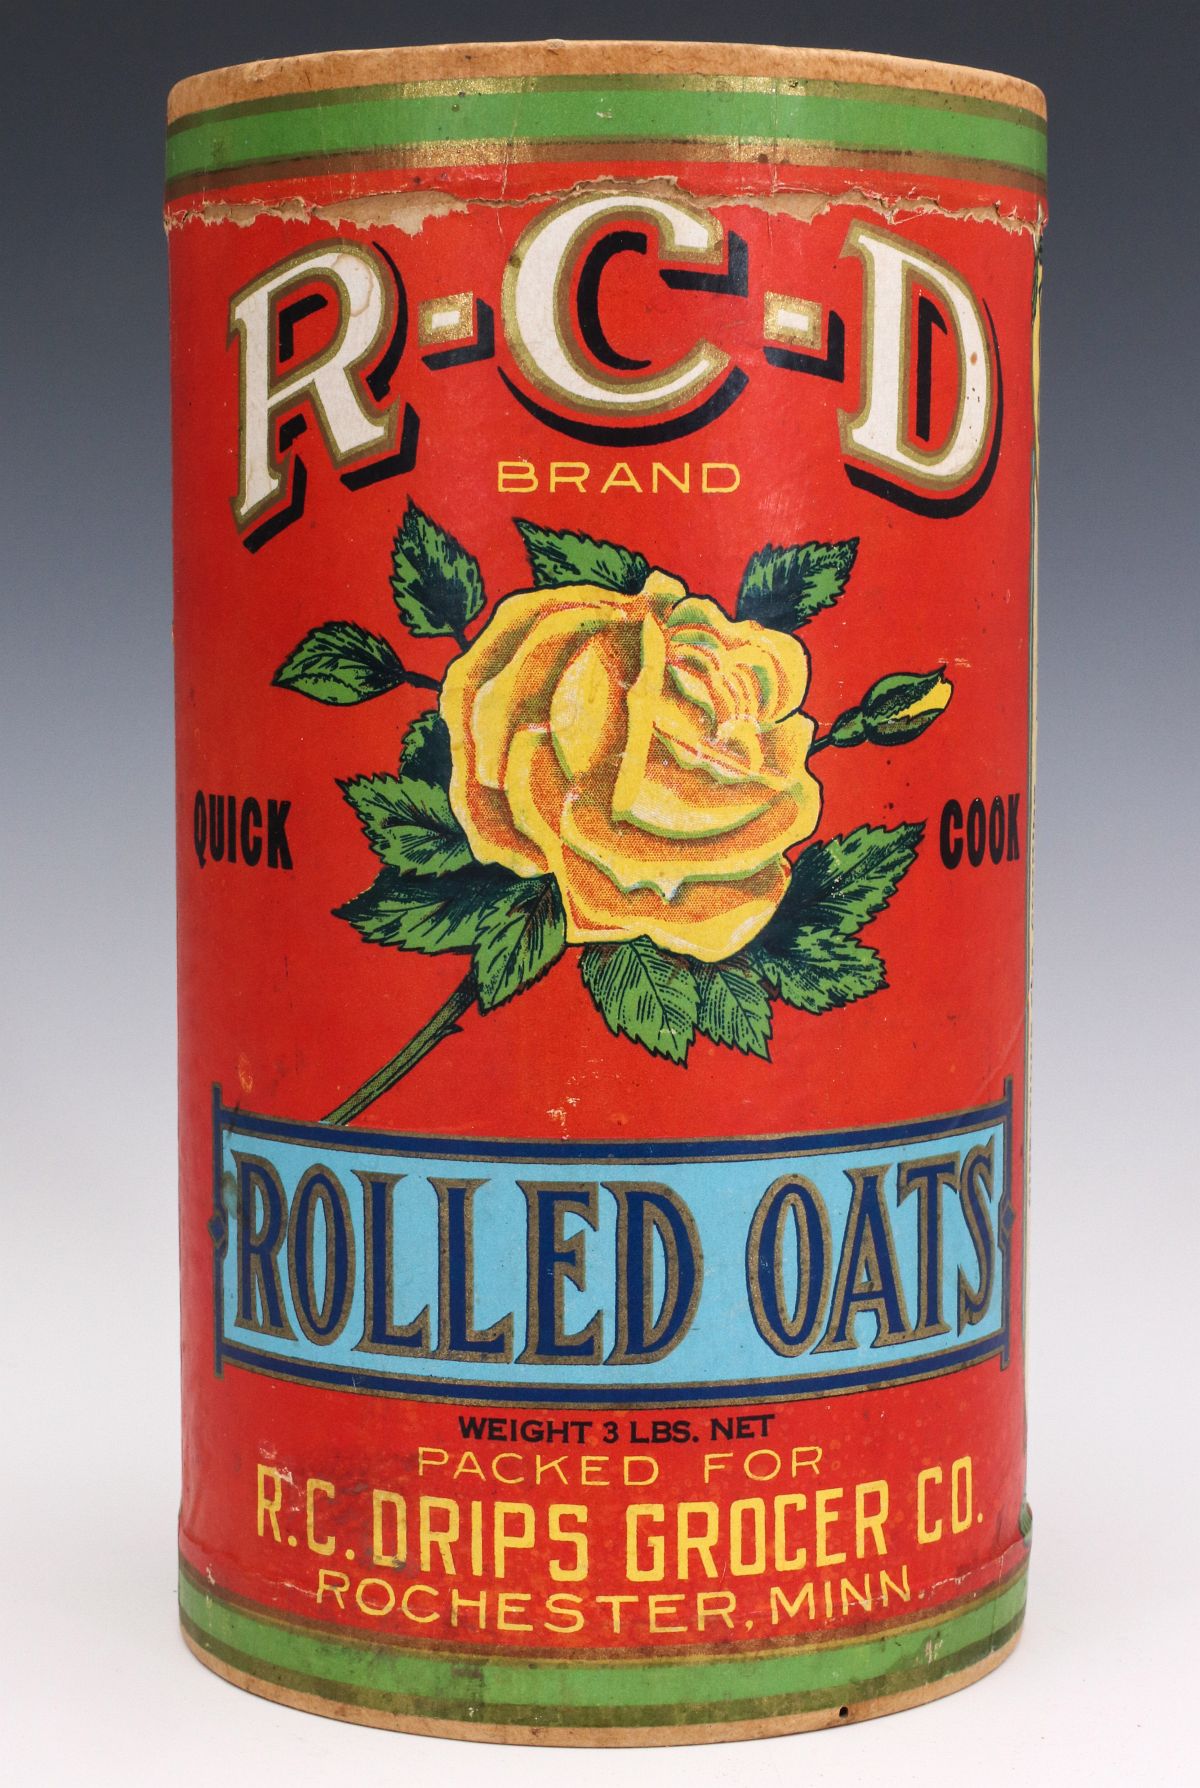 AN R-C-D BRAND ROLLED OATS CONTAINER, CIRCA 1910